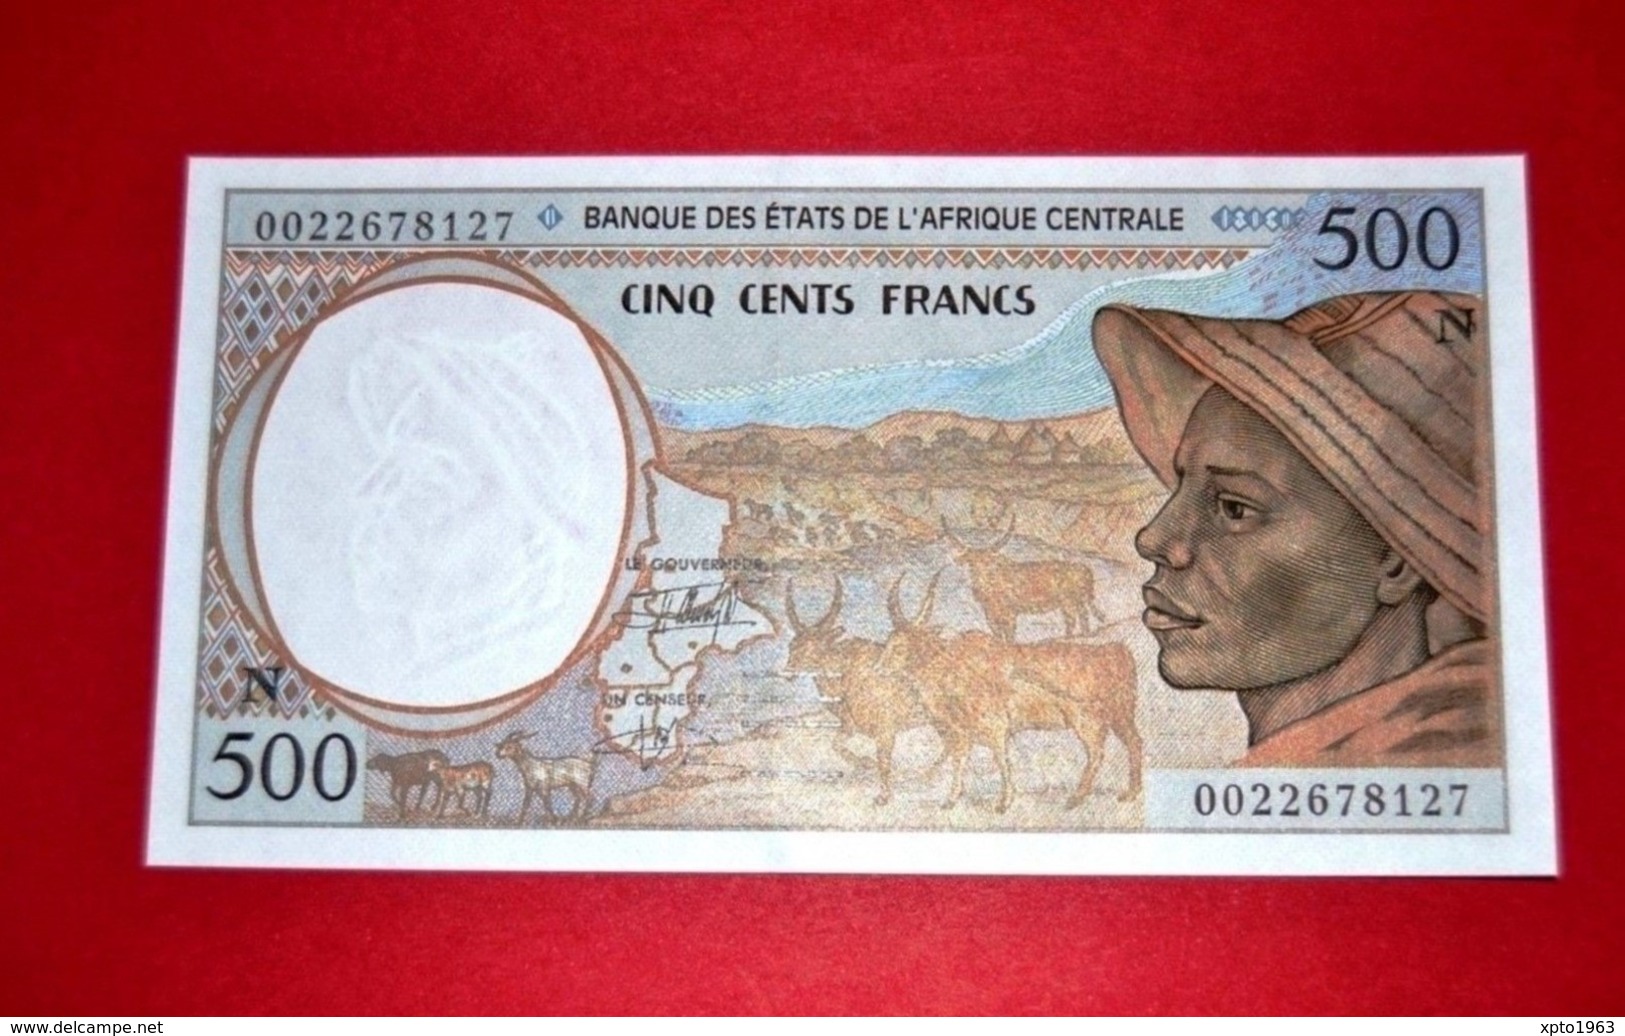 CENTRAL AFRICAN ST "N" 500 FRANCS 2000 P-501Ng UNC - Stati Centrafricani